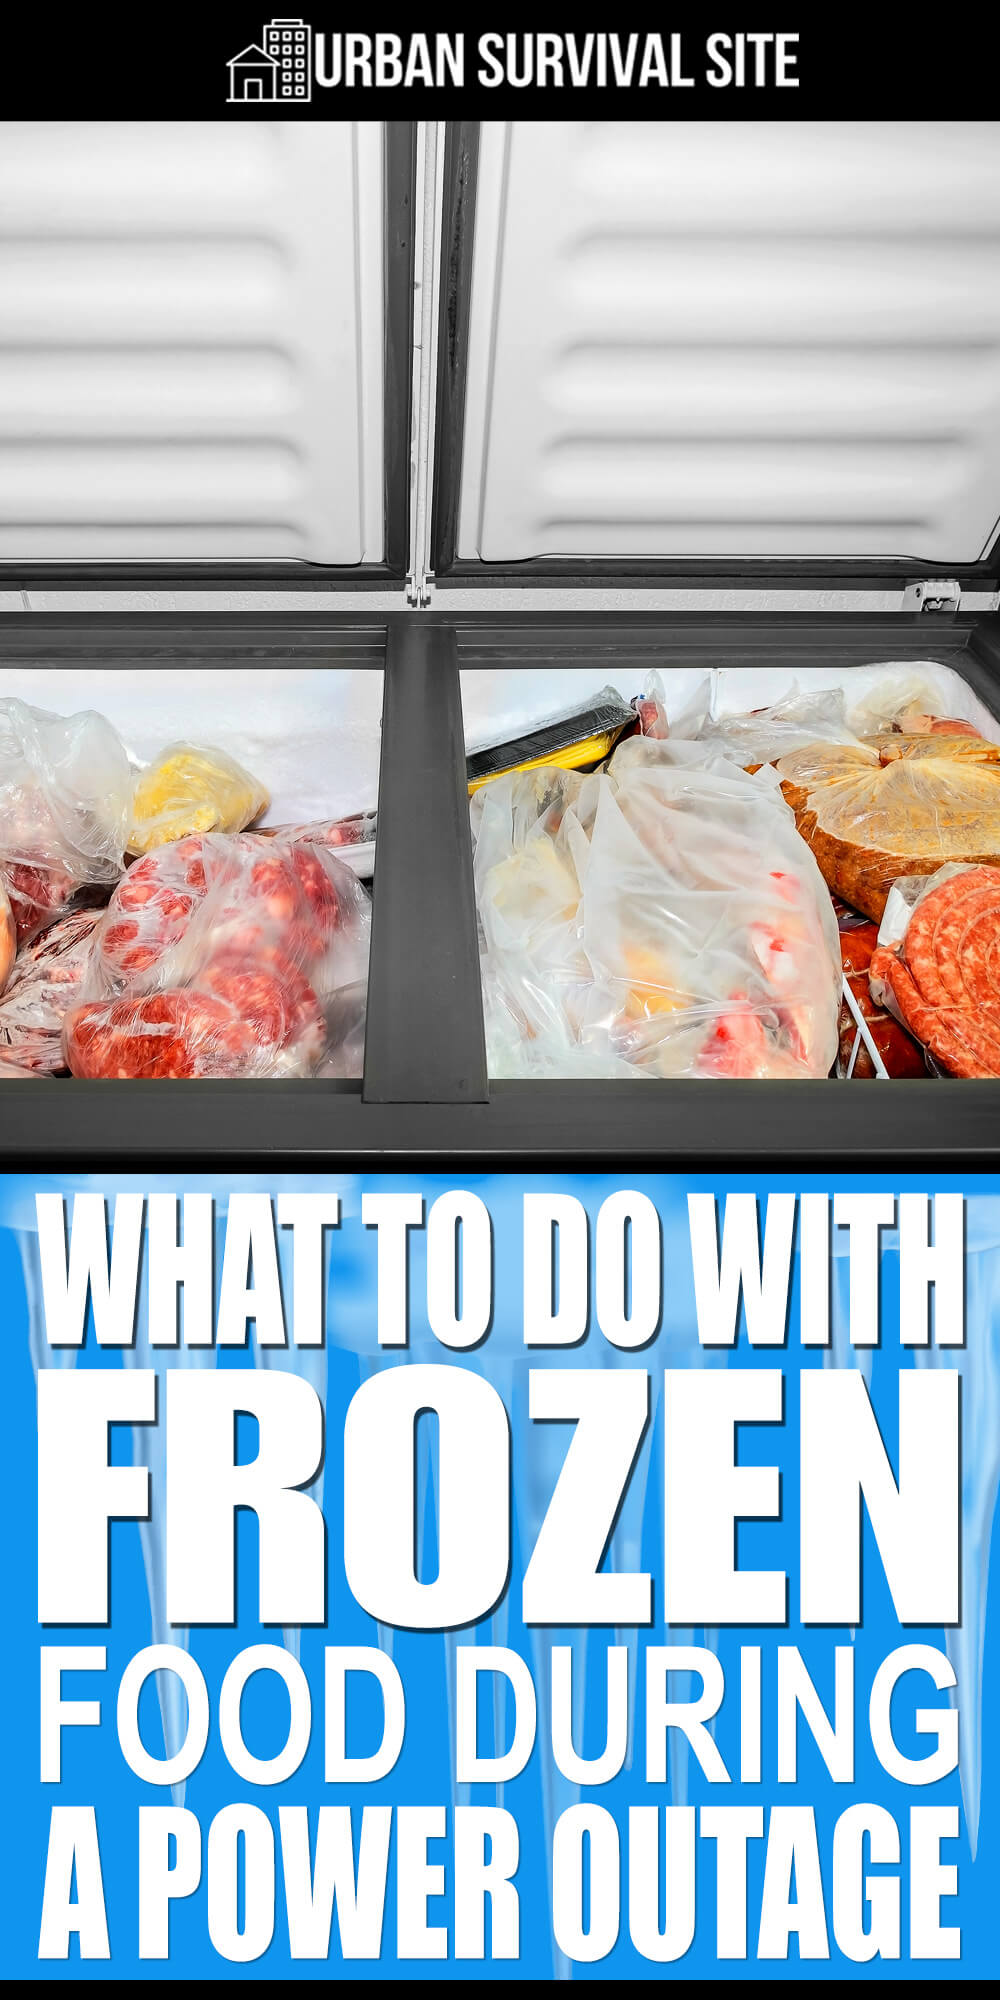 What to Do With Frozen Food During A Power Outage